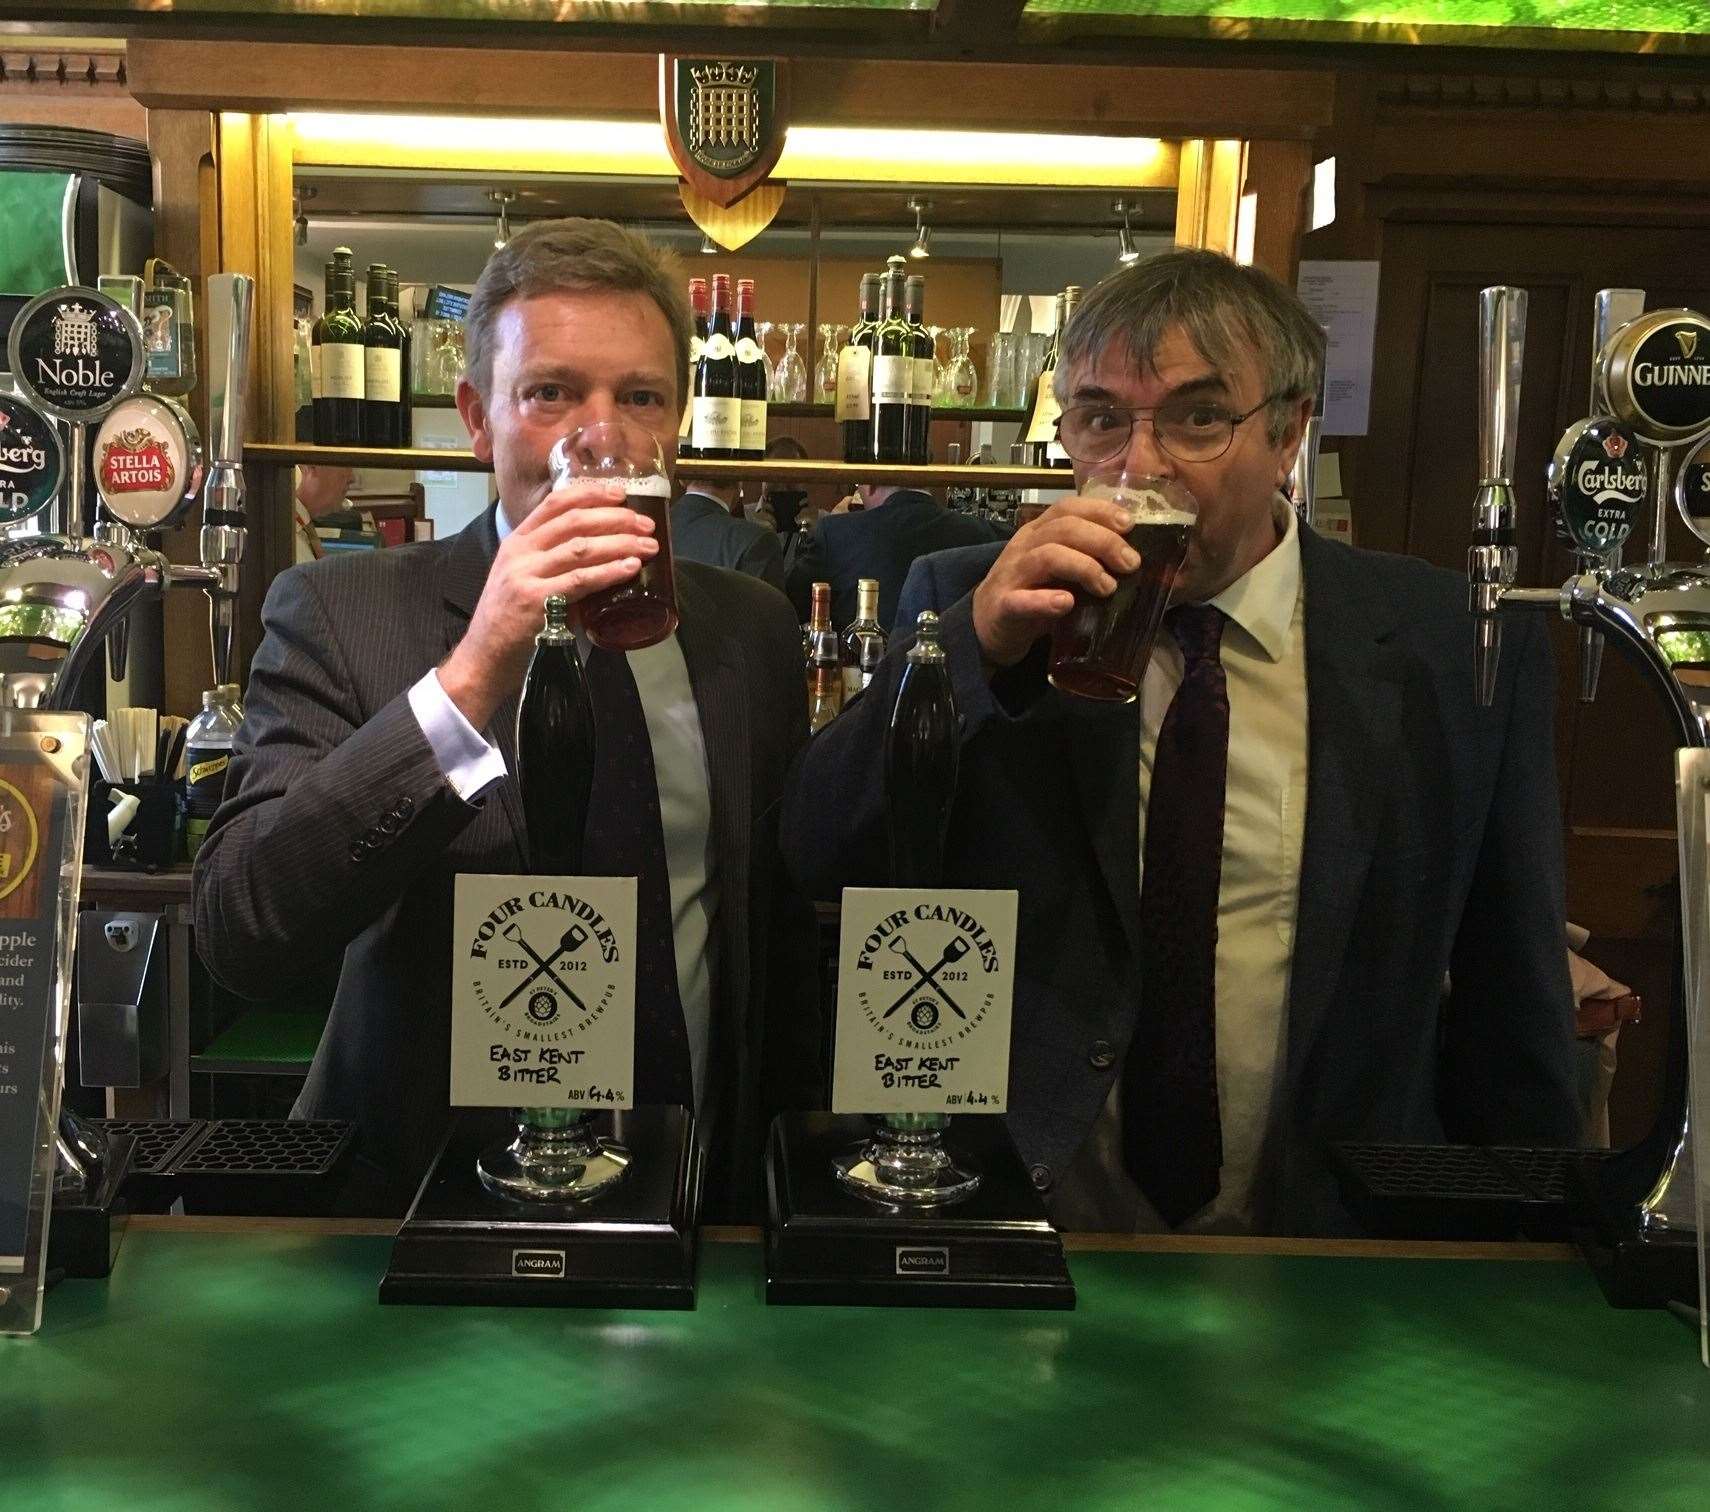 South Thanet MP Craig Mackinlay sups a pint of Four Candles' brew in the House of Commons bar alongside Mike Beaumont in 2018